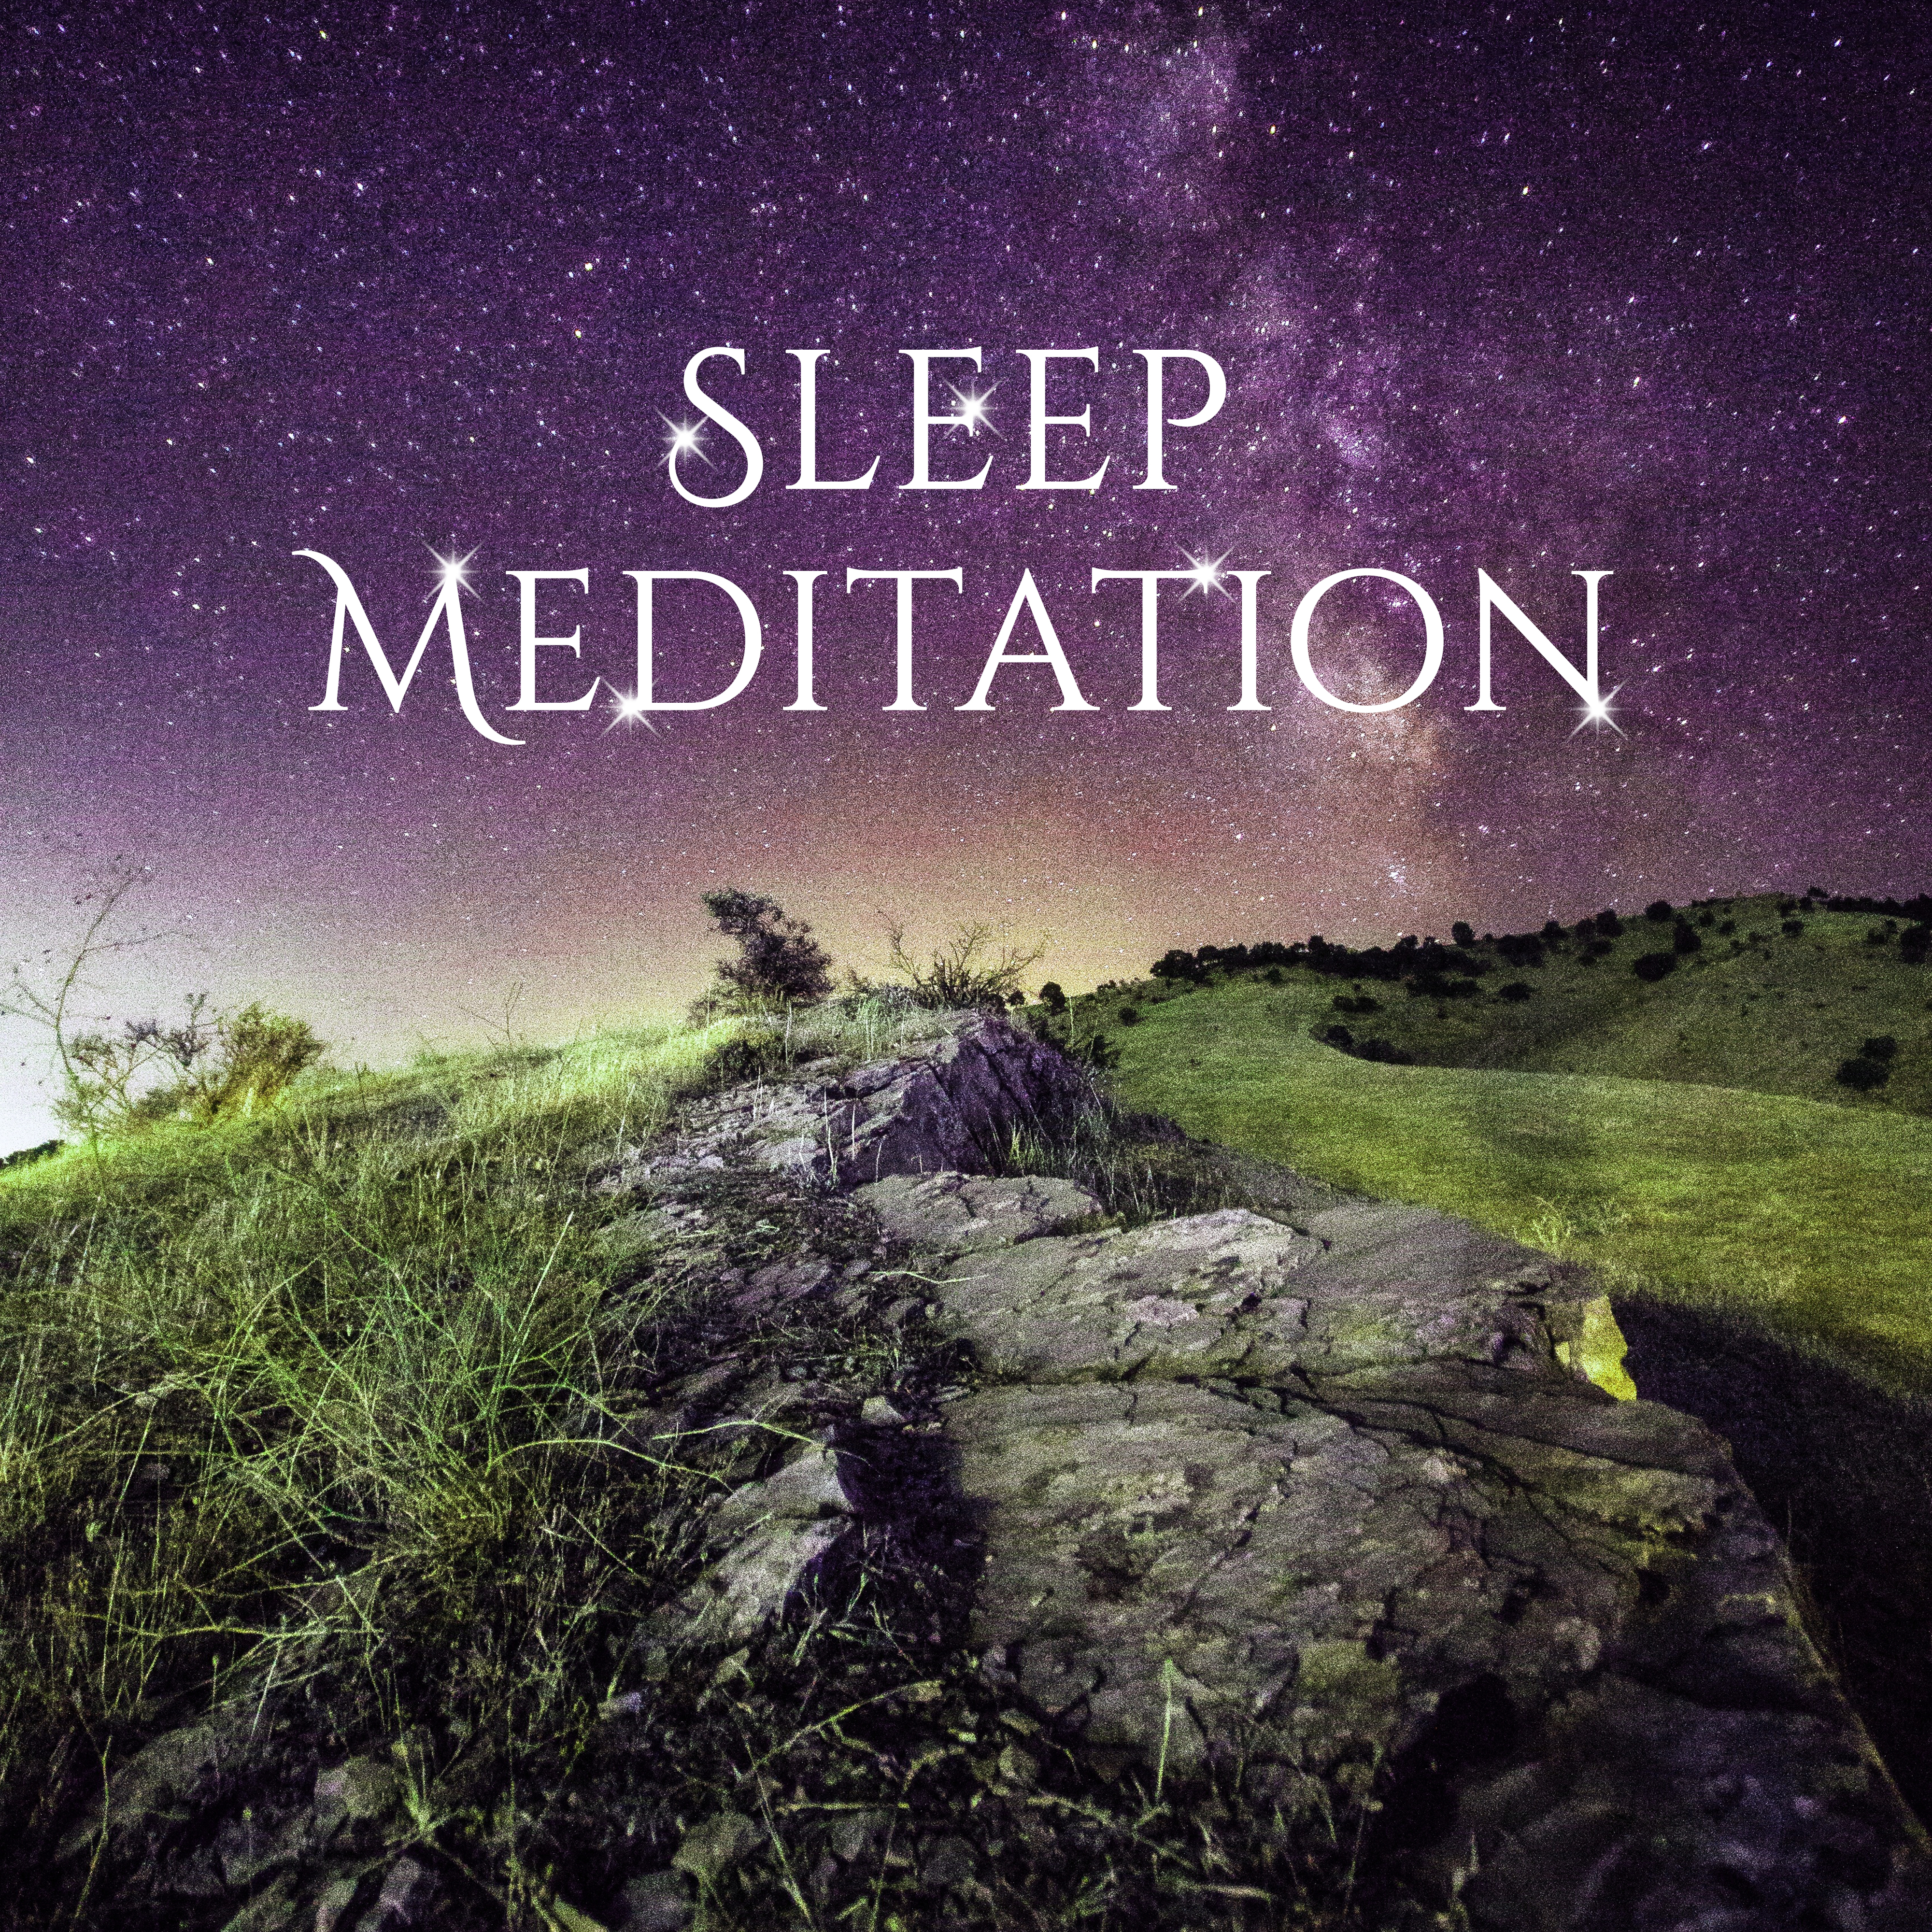 Sleep Meditation – Nature Sounds, Calming New Age Music, Relaxation, Sleep, Healing Bliss Therapy